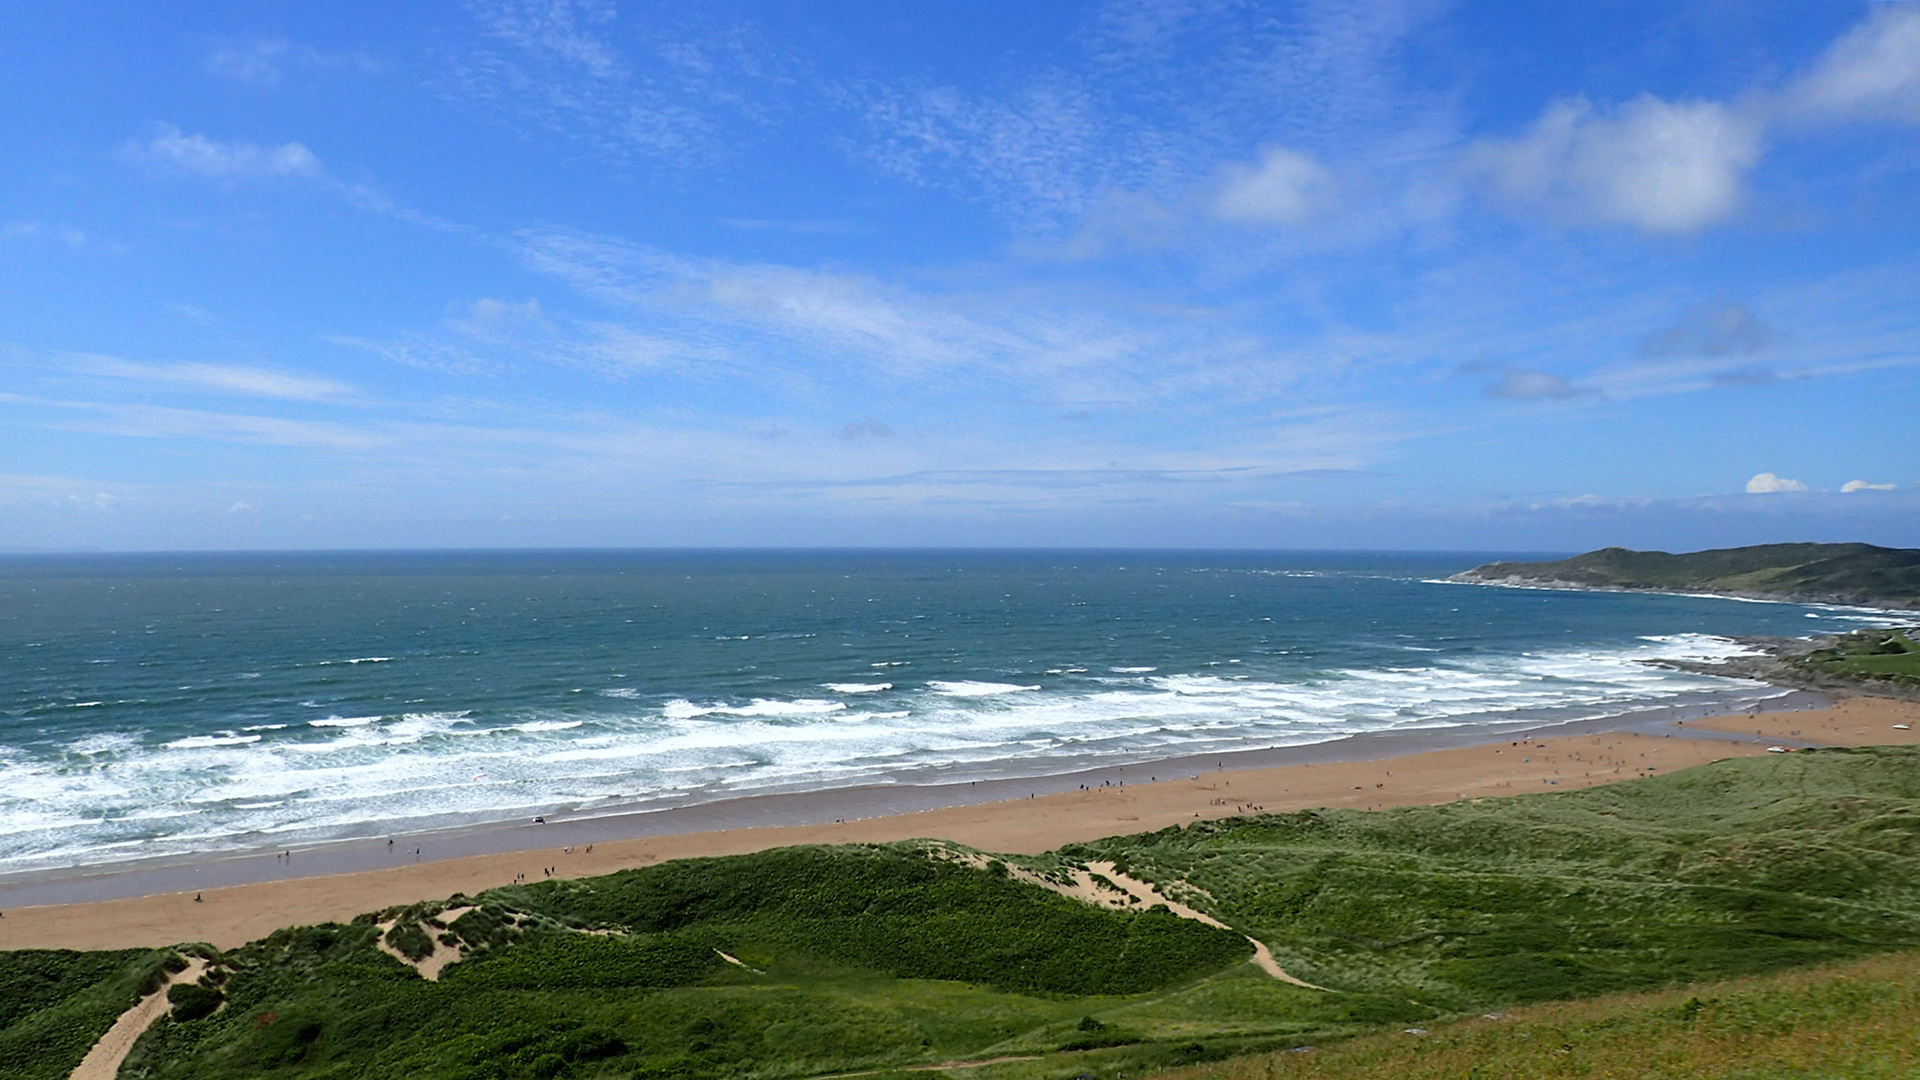 Looking from the top of Potter's Hill, shows exactly how blown out the surf is